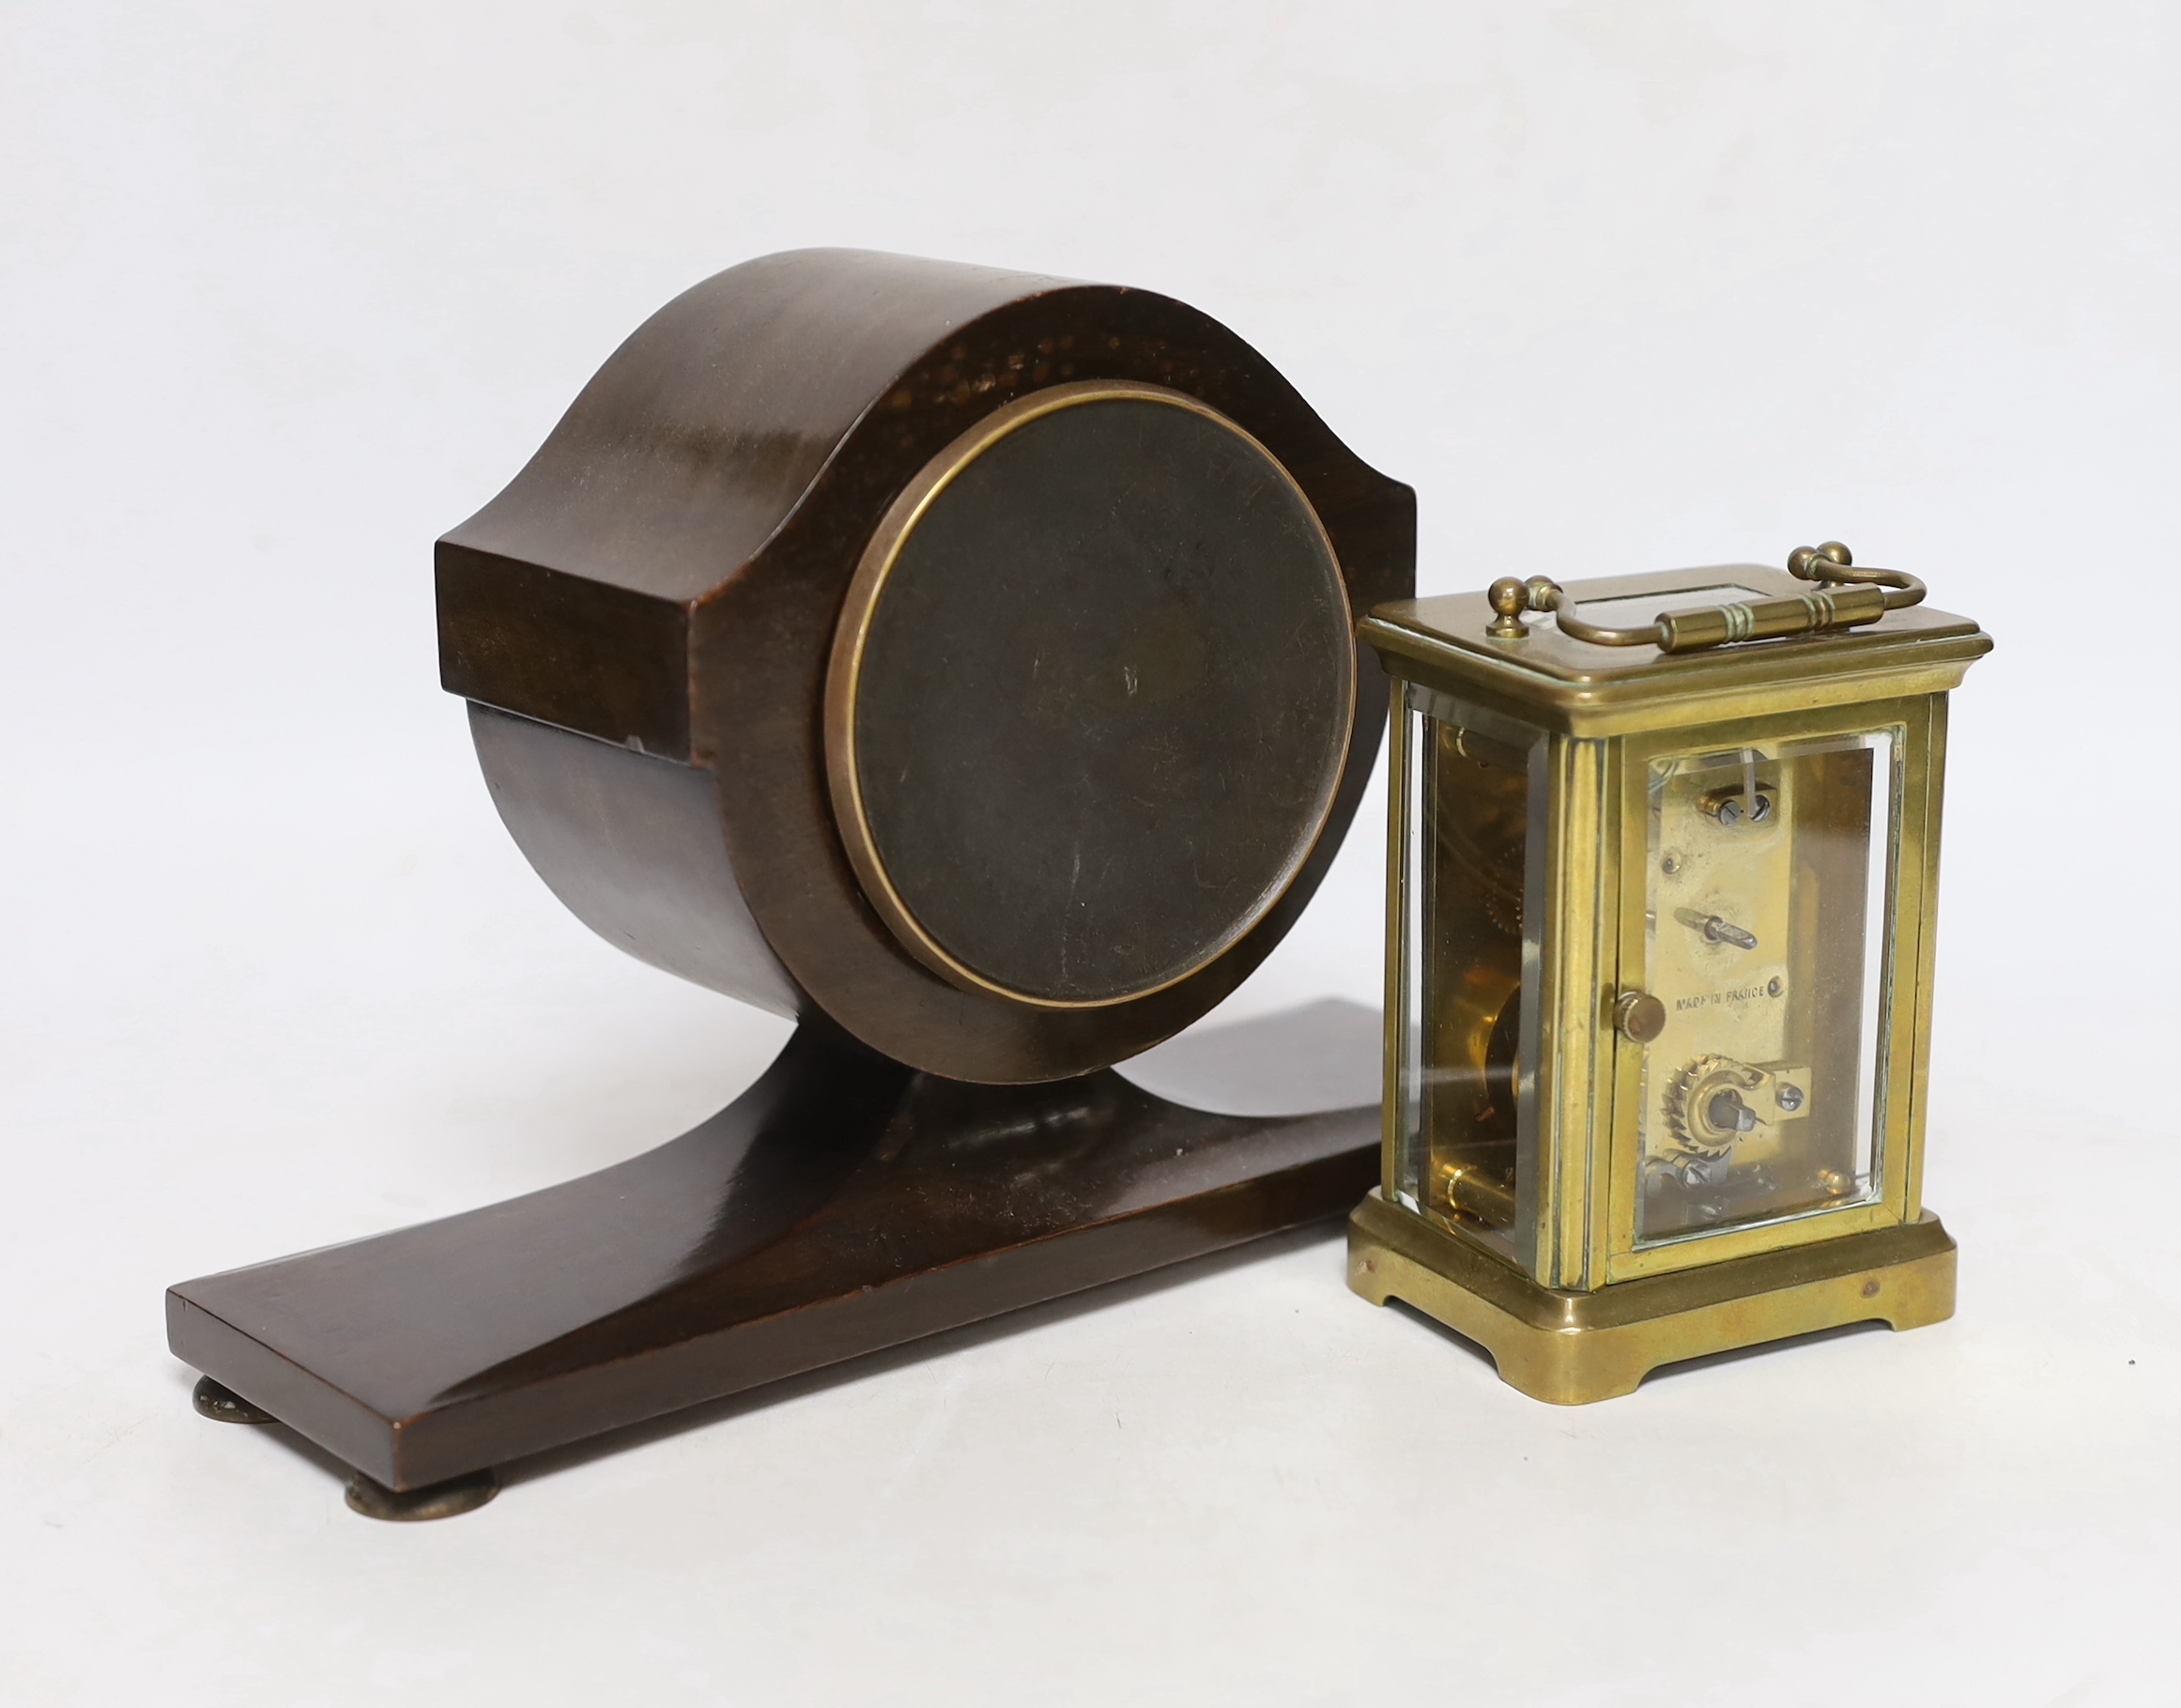 A carriage clock and an Edwardian strung mahogany mantel clock, 24cm wide